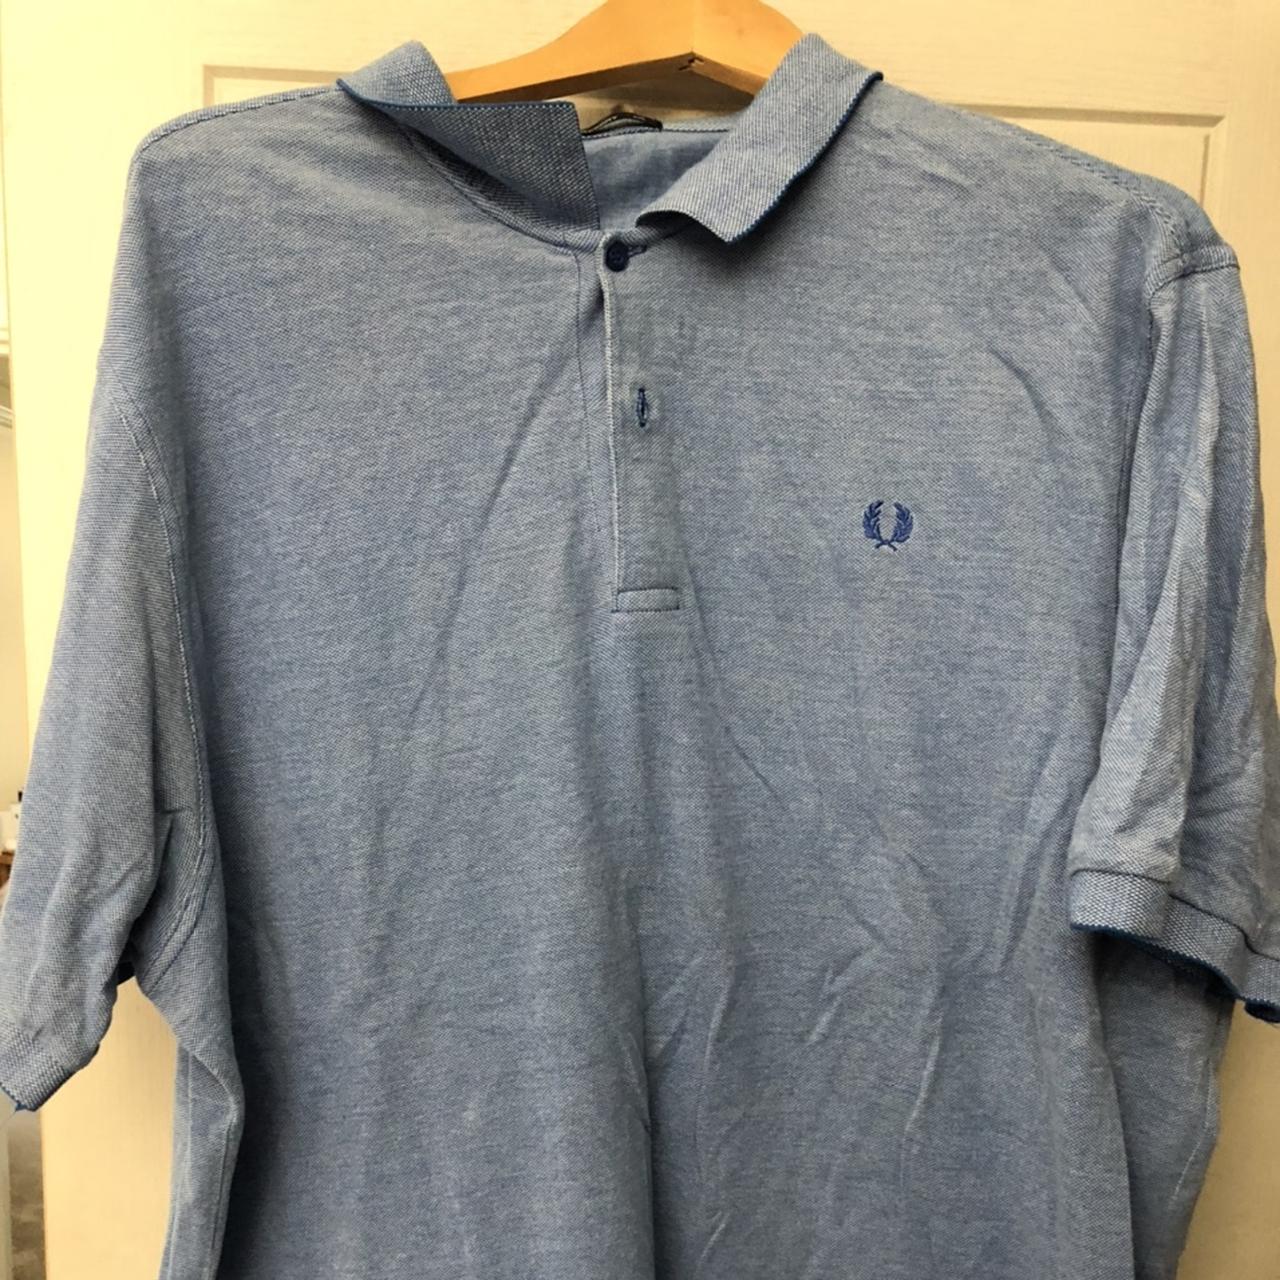 Fred perry - Depop